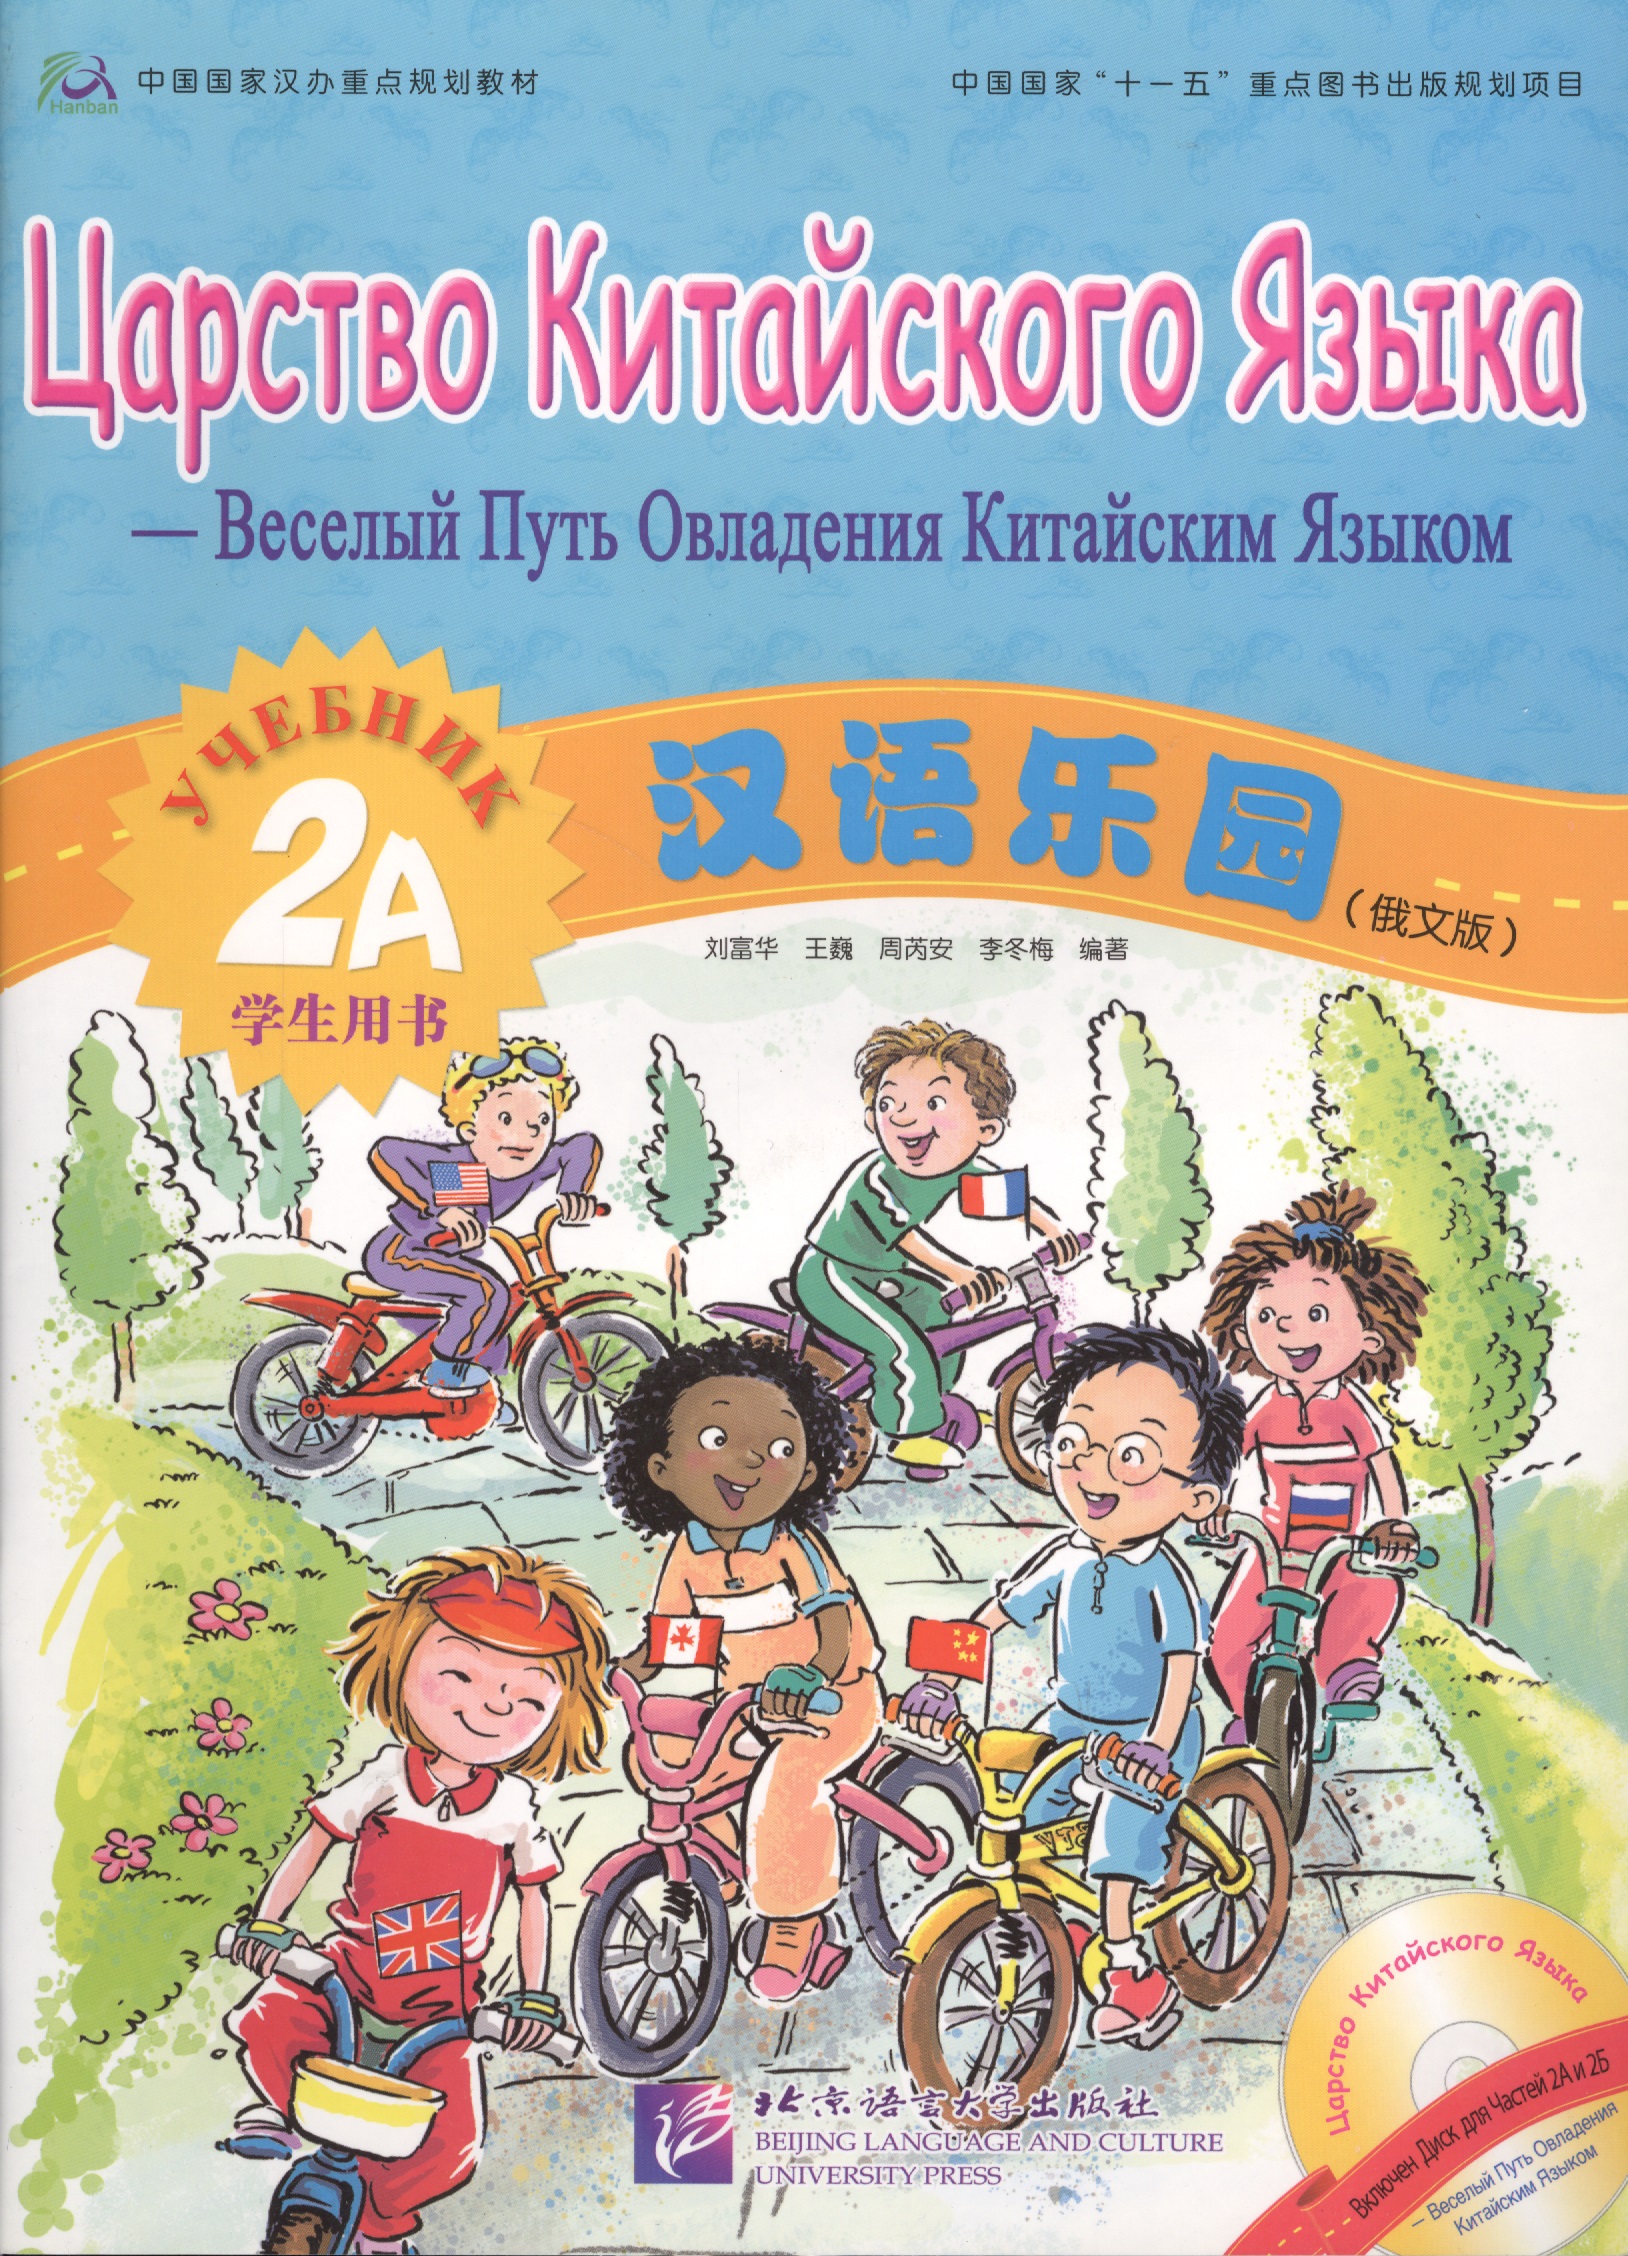 Chinese Paradise (Russian edition) 2A / Царство китайского языка (русское издание) 2A - Students book with CD fuhua l chinese paradise russian edition 2a царство китайского языка русское издание 2a students book with cd